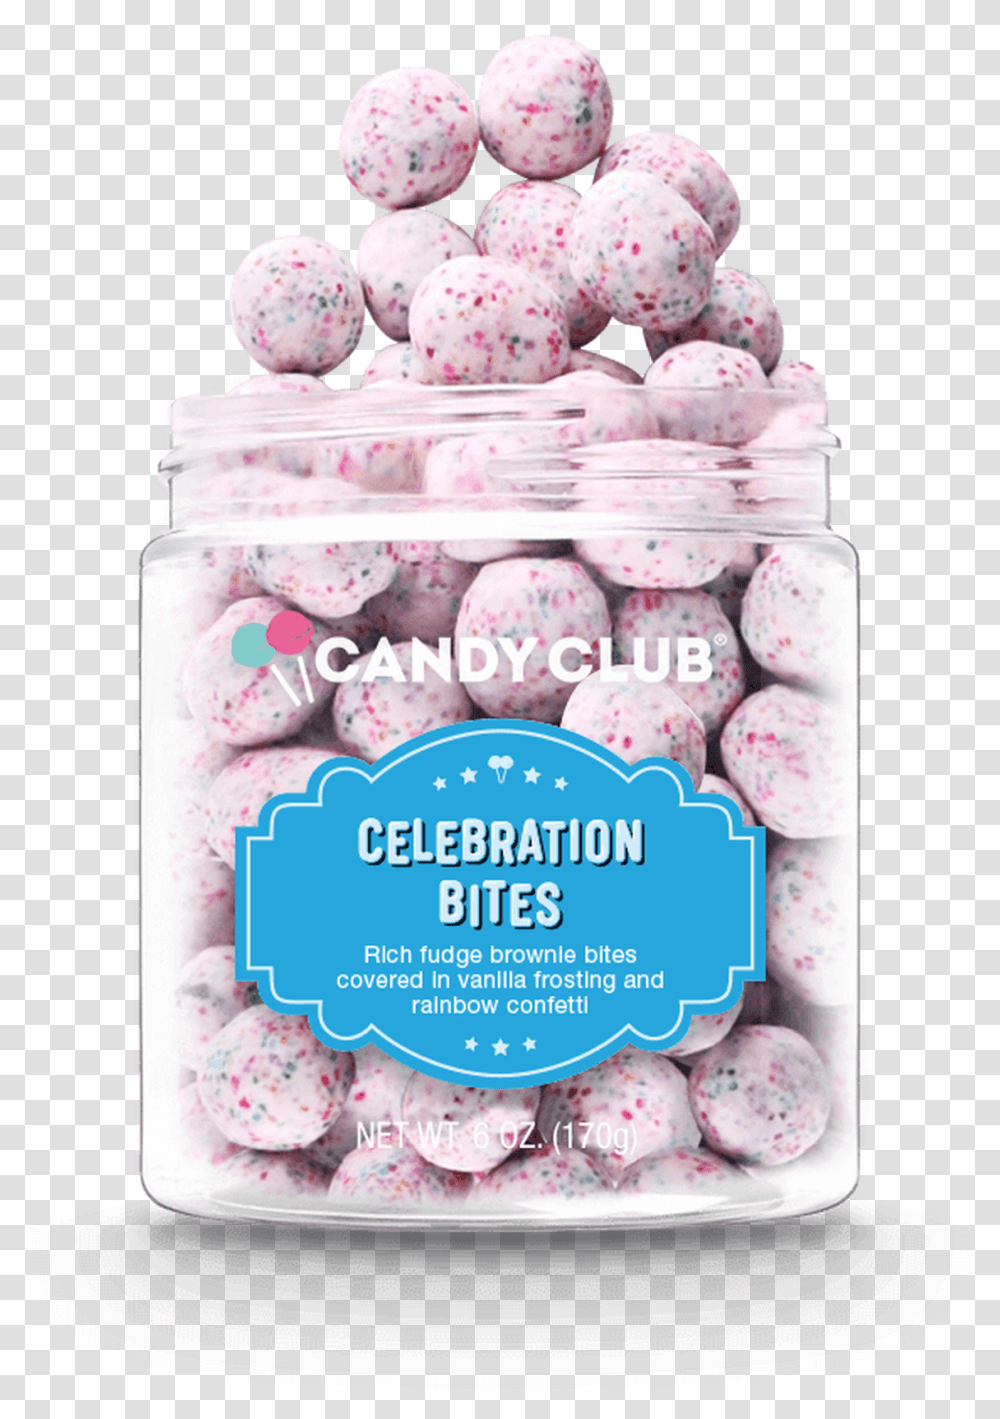 A Cup Of Celebration Bites Candy Candy Club Celebration Bites, Food, Dessert, Birthday Cake, Sweets Transparent Png